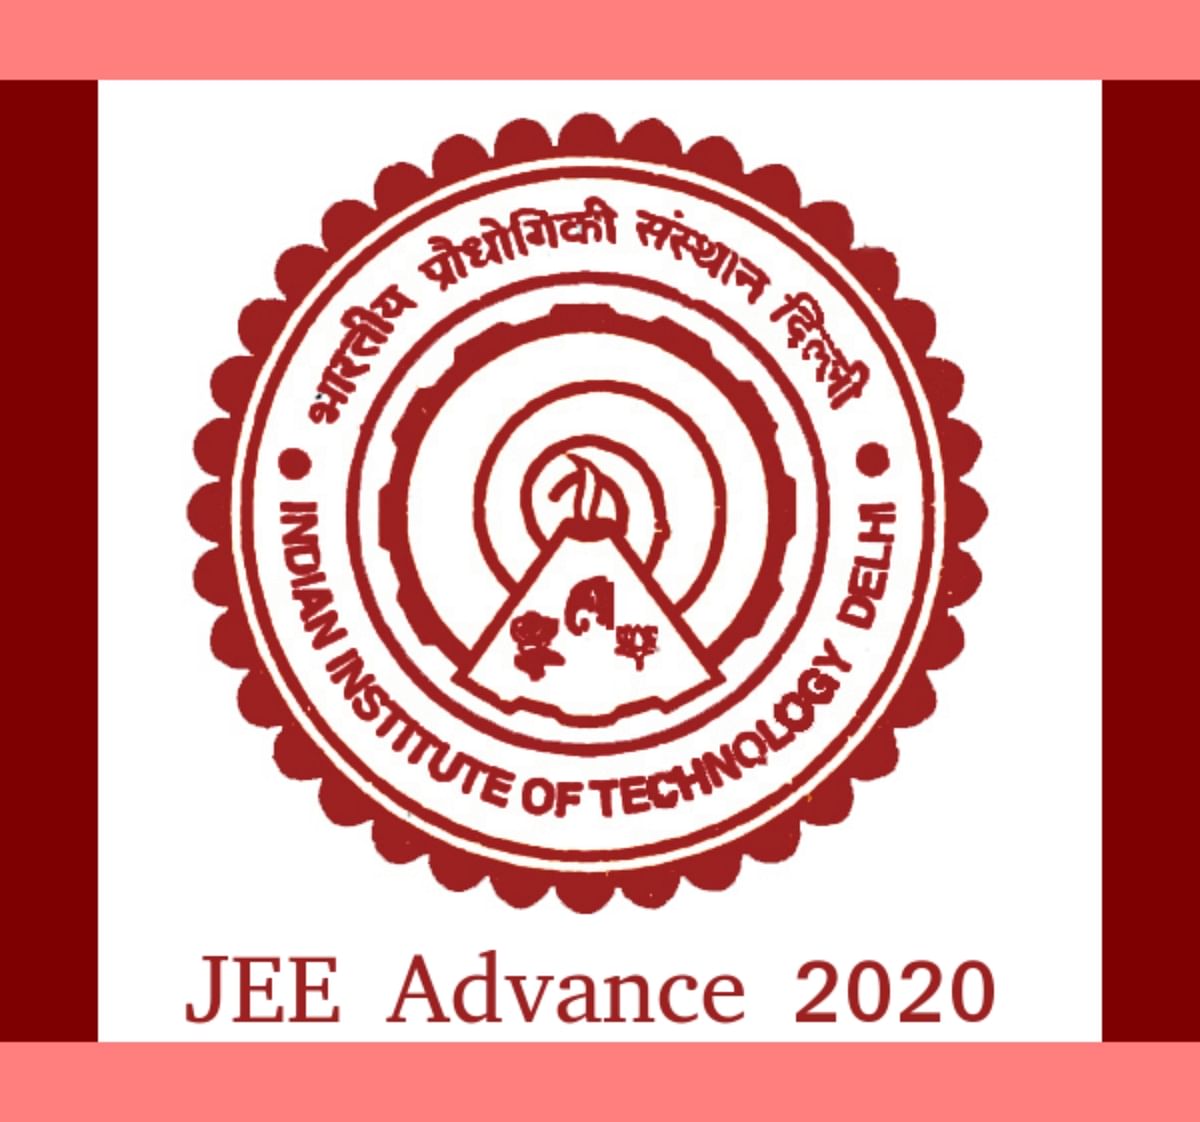 JEE Advanced 2020: One More Chance in 2021 for Those who Couldn’t Able to Give JEE Advanced 2020